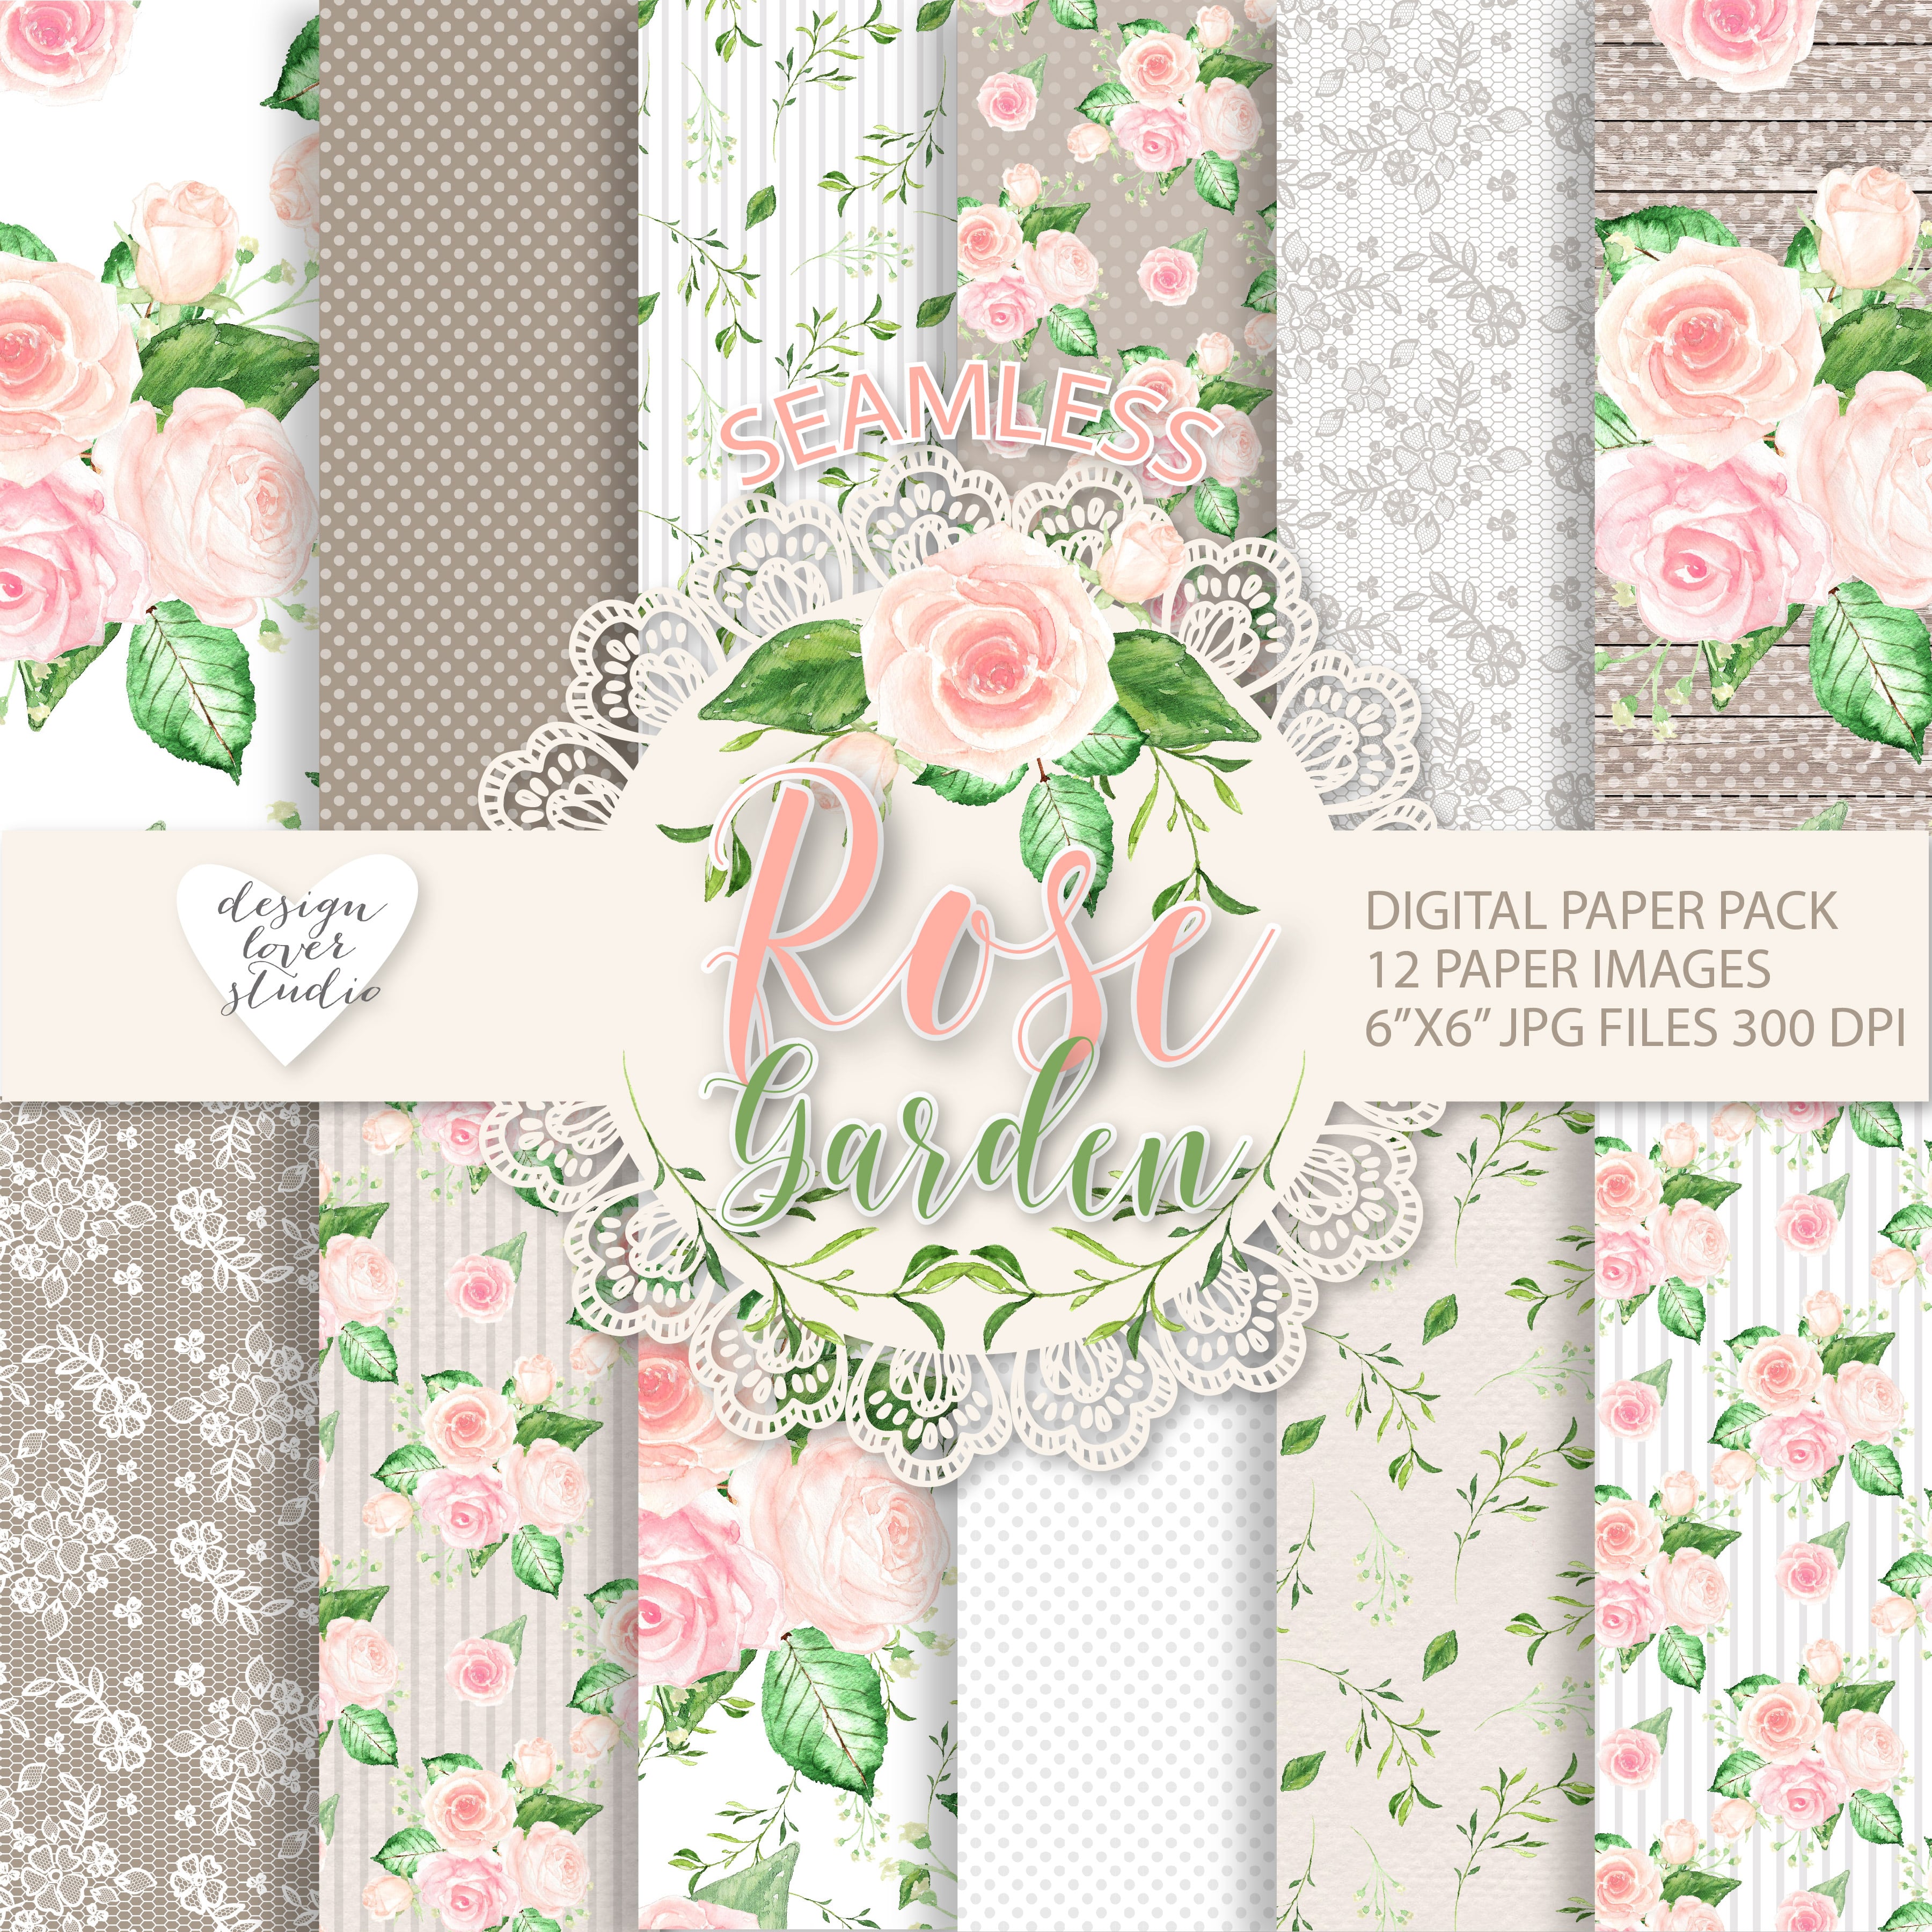 Watercolor Rose: 2 Packs of Seamless Patterns with 71% OFF